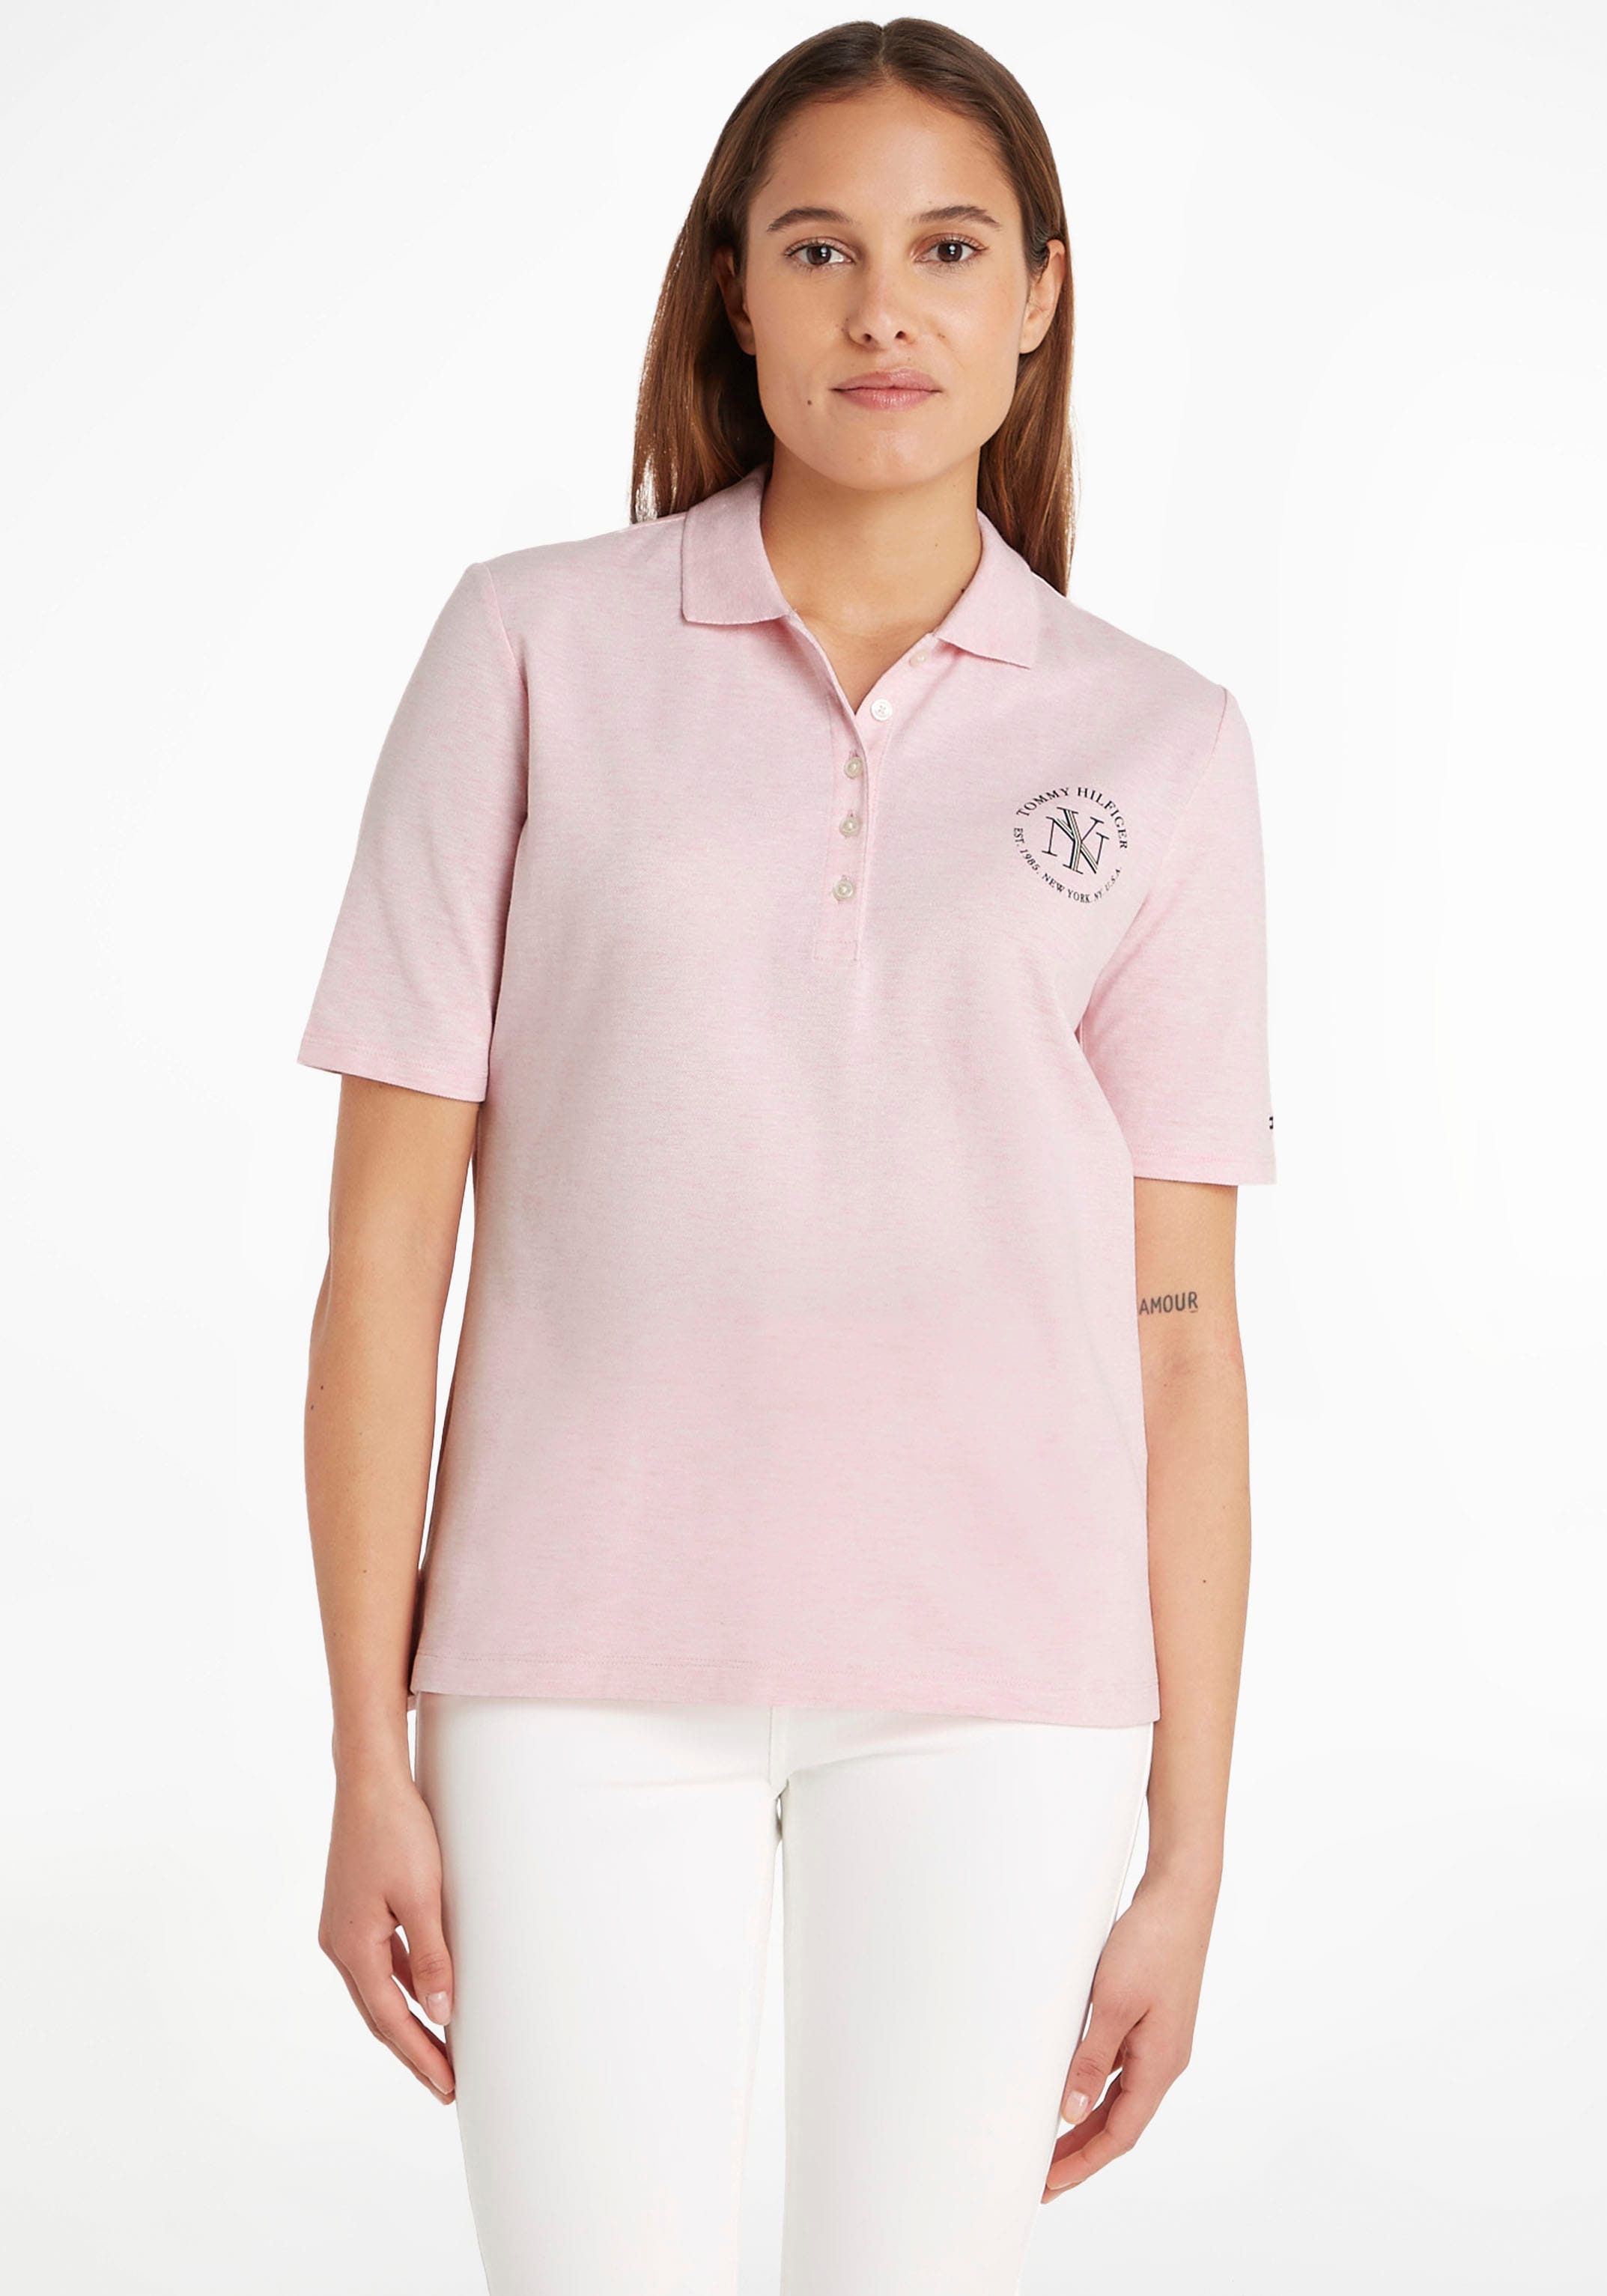 Tommy Hilfiger Poloshirt »REG NYC ♕ ROUNDALL Tommy SS«, mit bei POLO Markenlabel Hilfiger